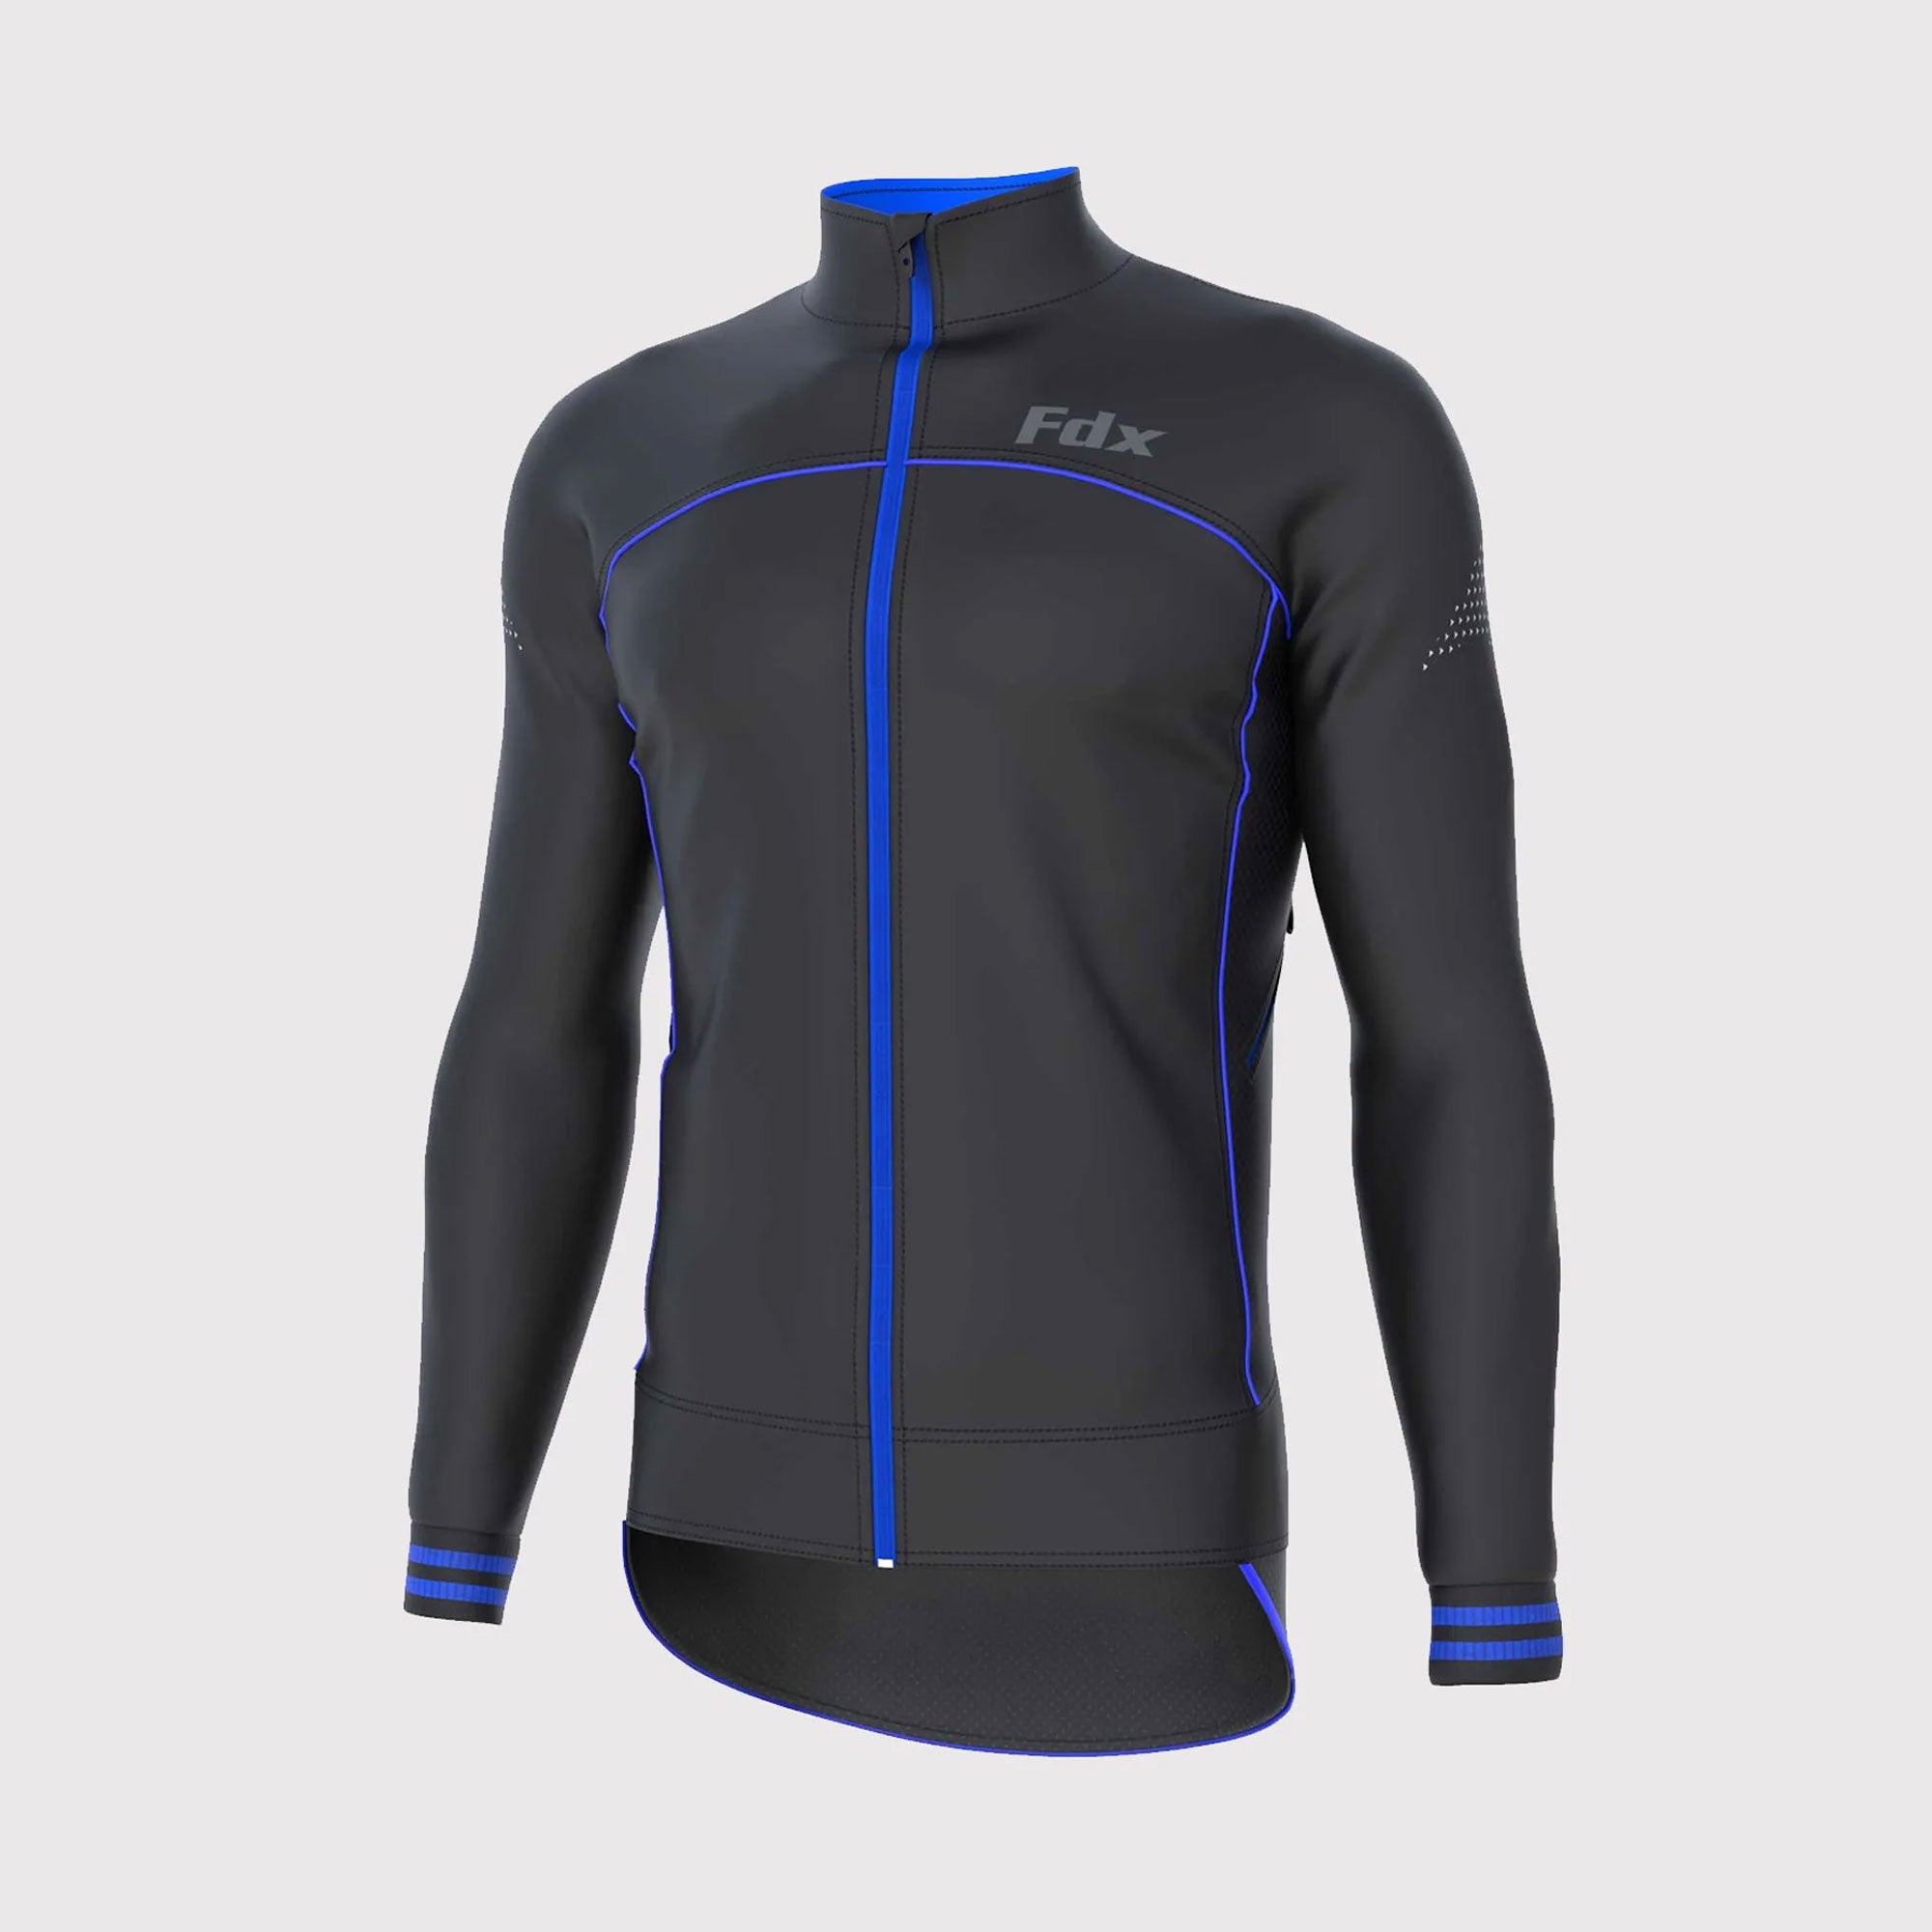 Fdx Mens Black & Blue Cycling Jacket for Winter Thermal Casual Softshell Clothing Lightweight, Windproof, Waterproof & Pockets - Apollux